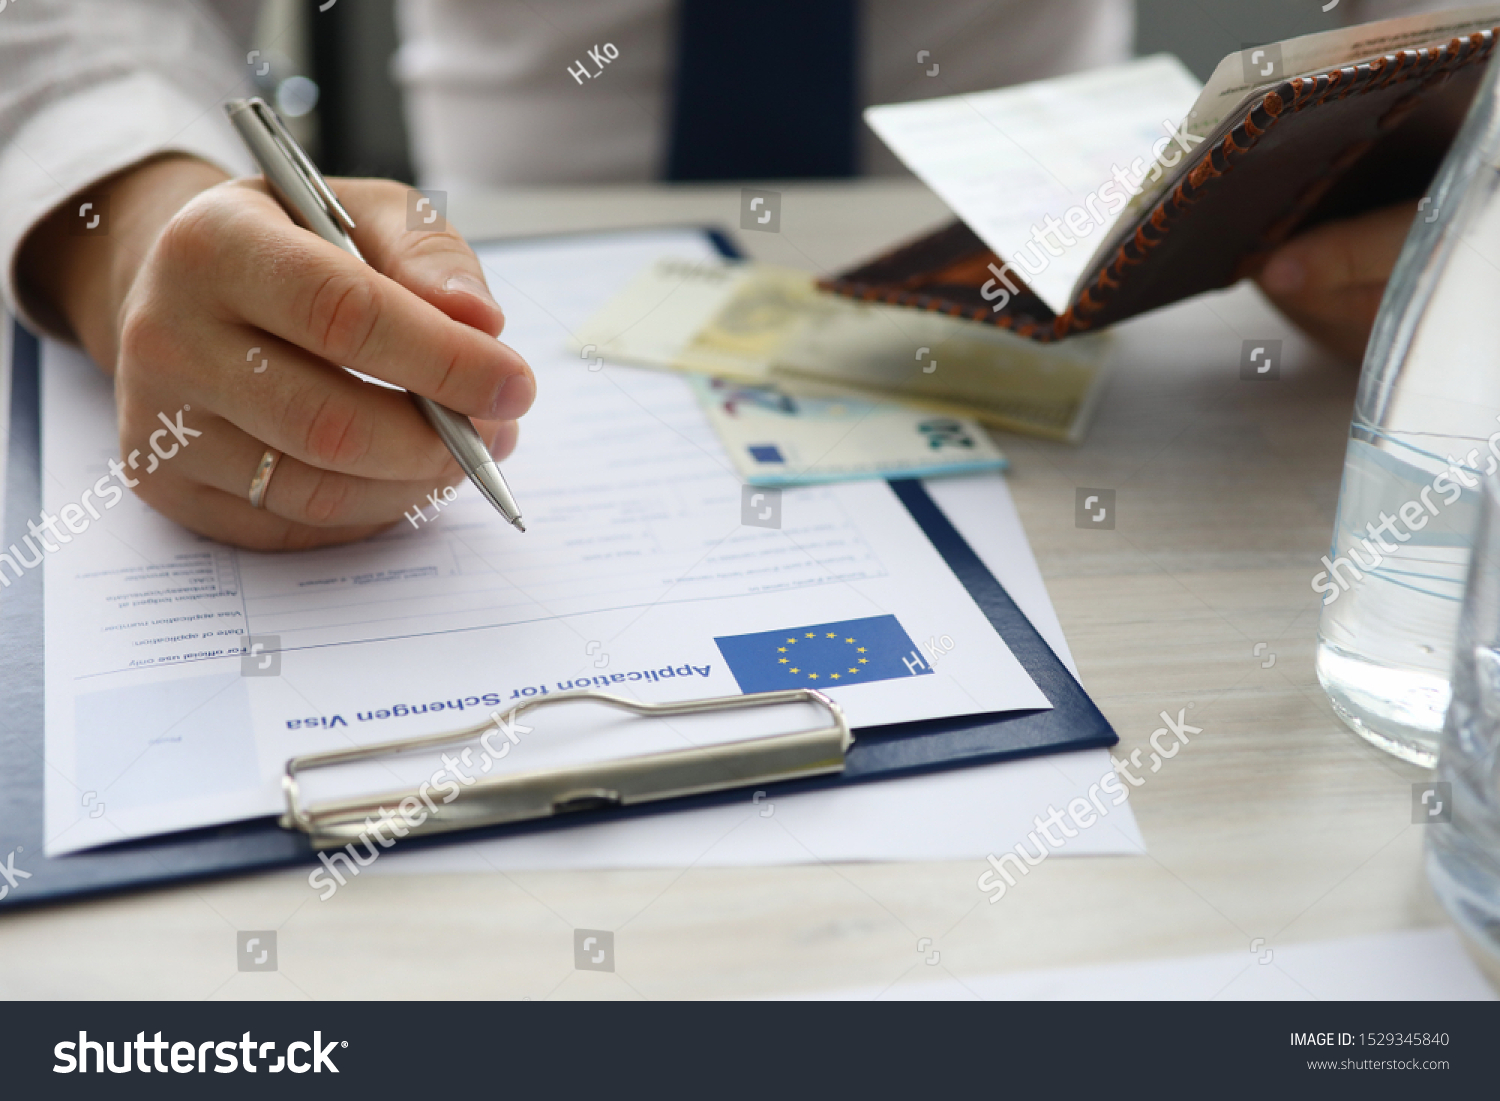 Focus on male hand holding passport and writing personal data in application for schengen visa. Man sitting at office. Travelling abroad or immigration concept. Blurred background #1529345840